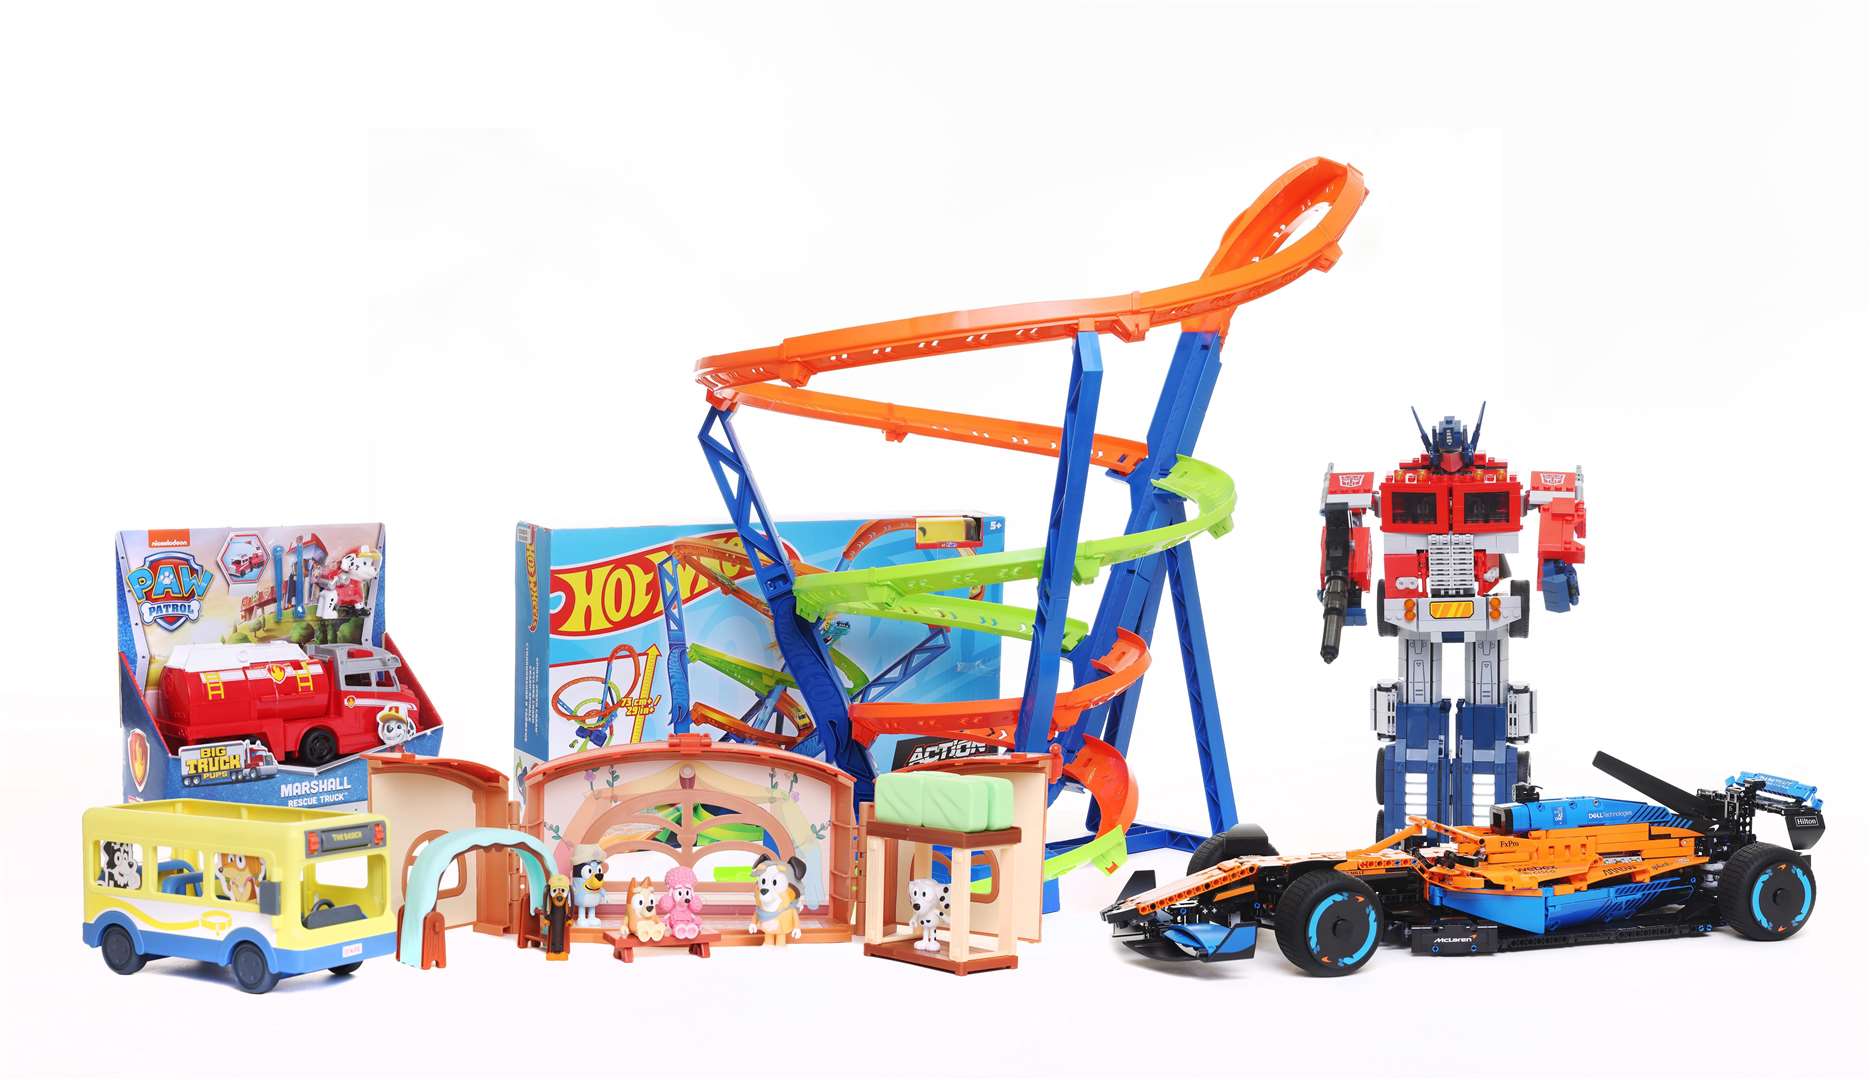 Argos releases its top 15 toys for Christmas 2022 with releases